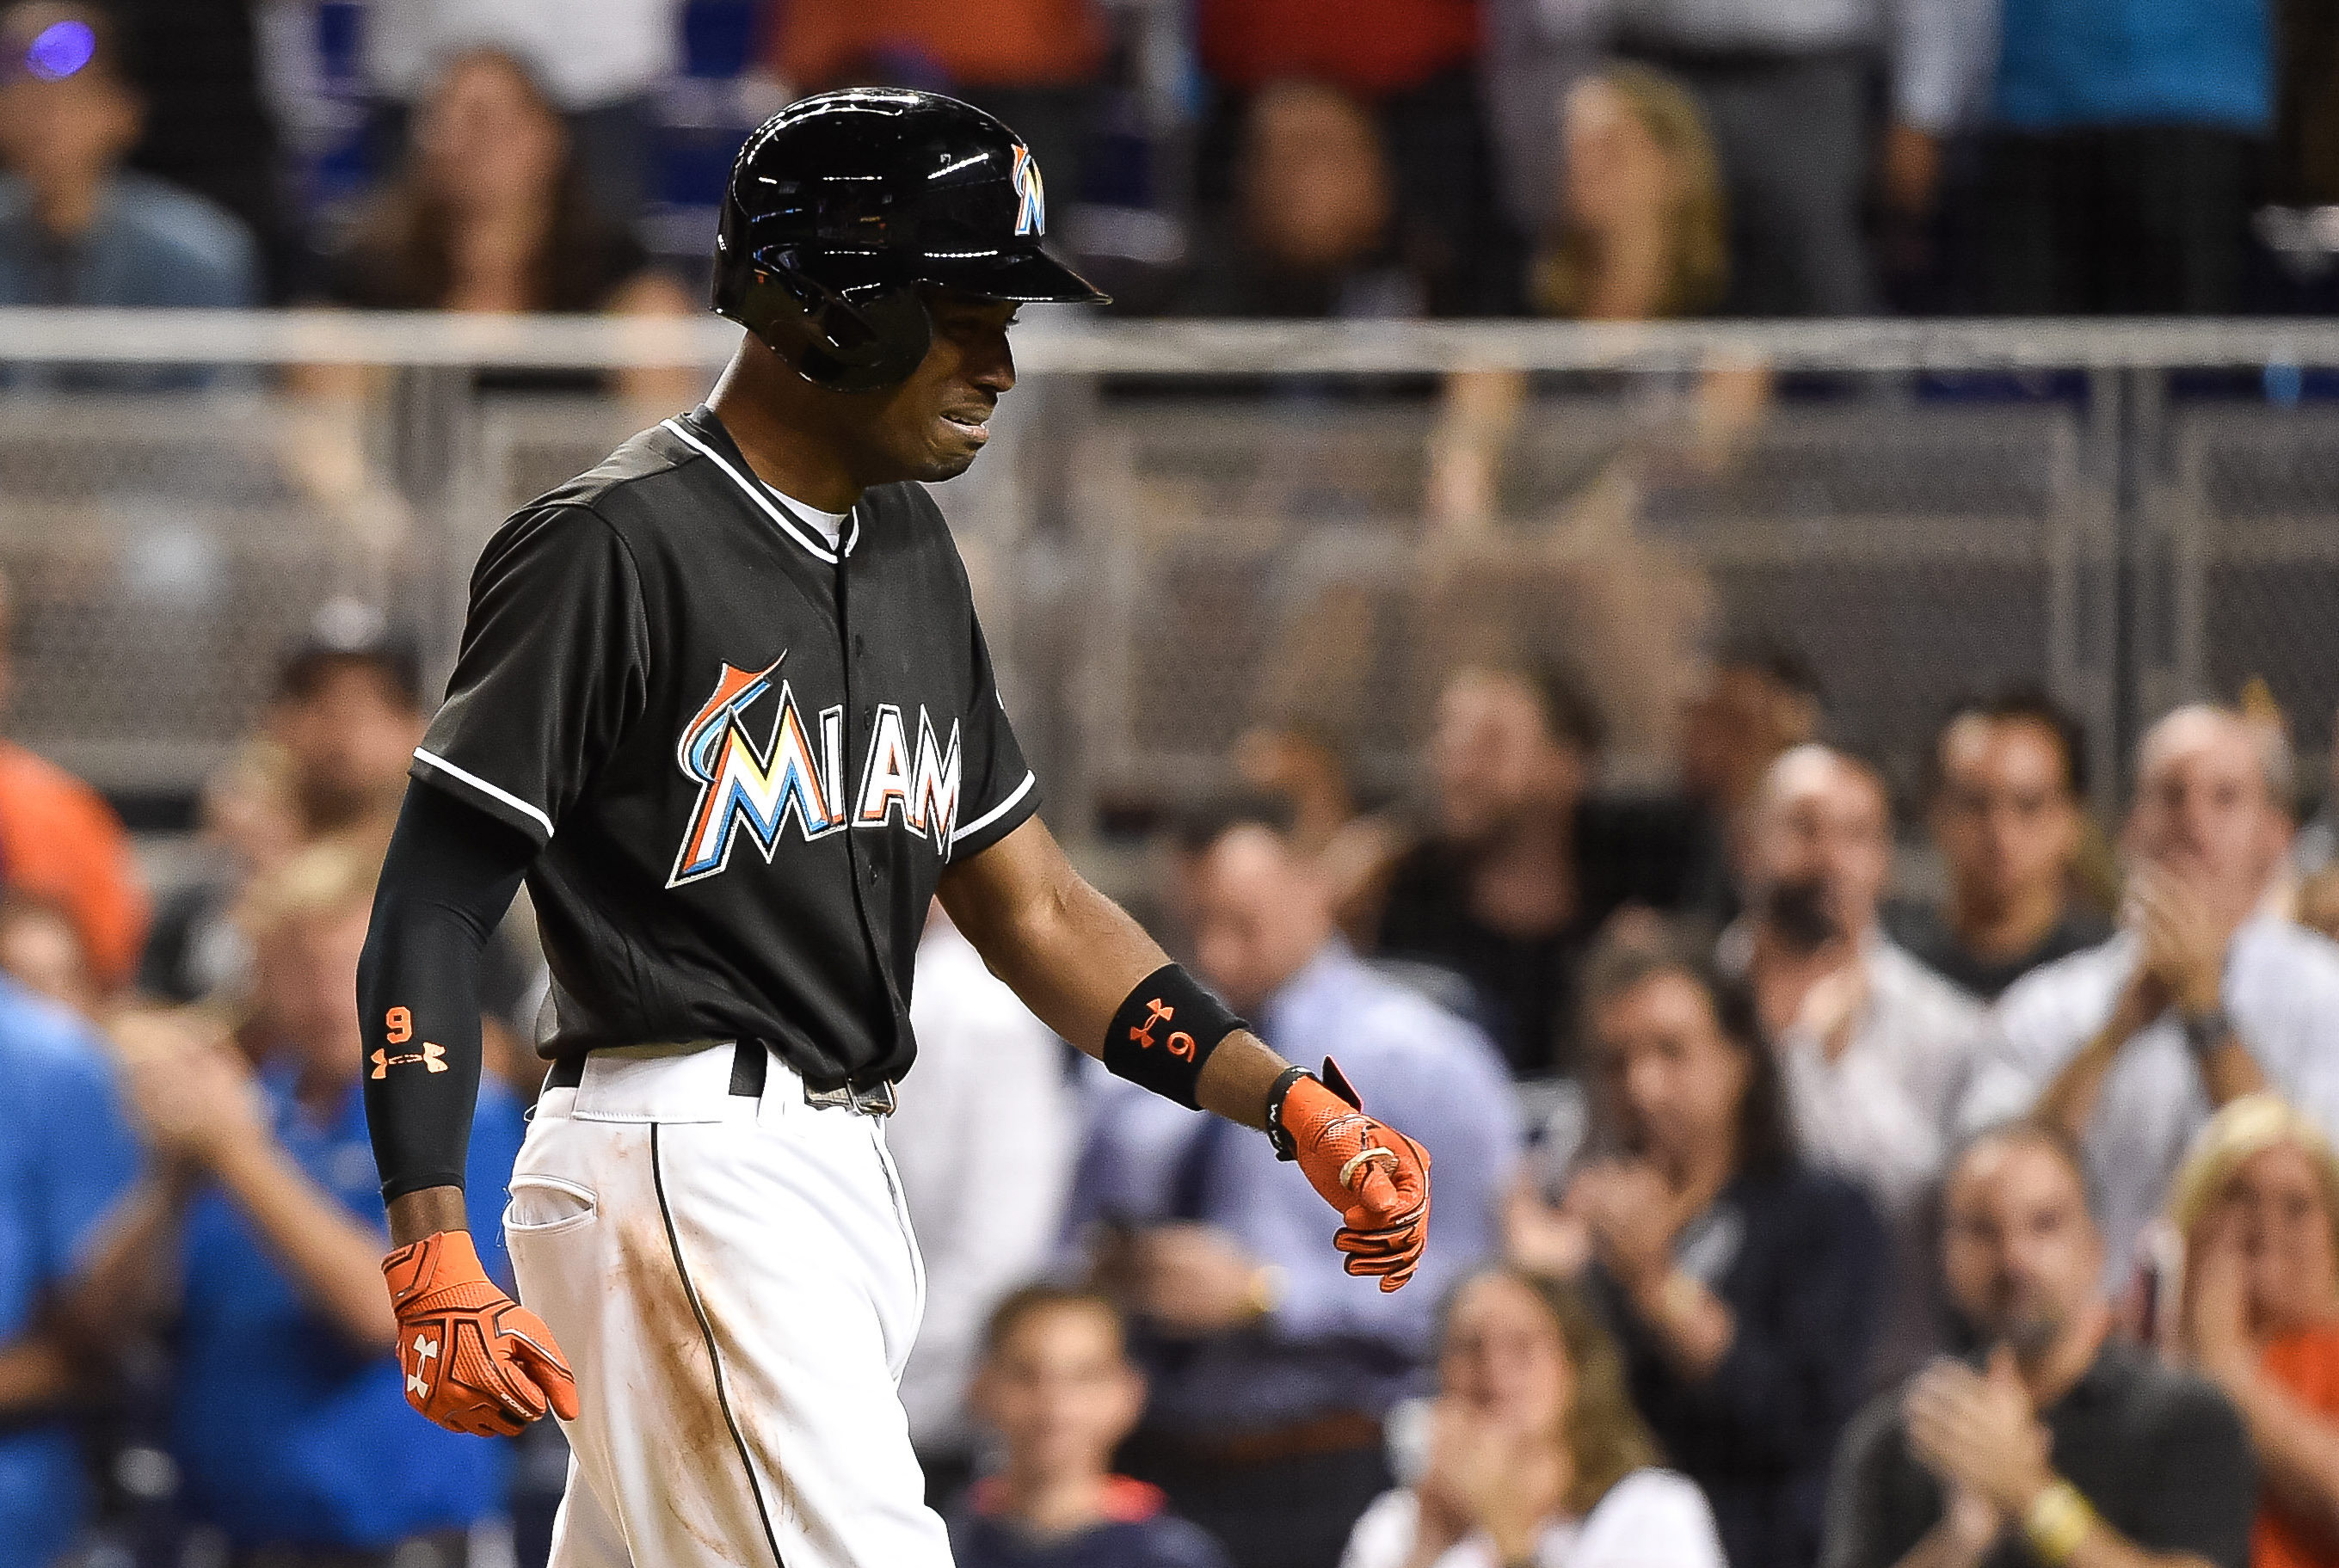 Dee Gordon Hits His First Home Run of the Year in Tribute to Jose